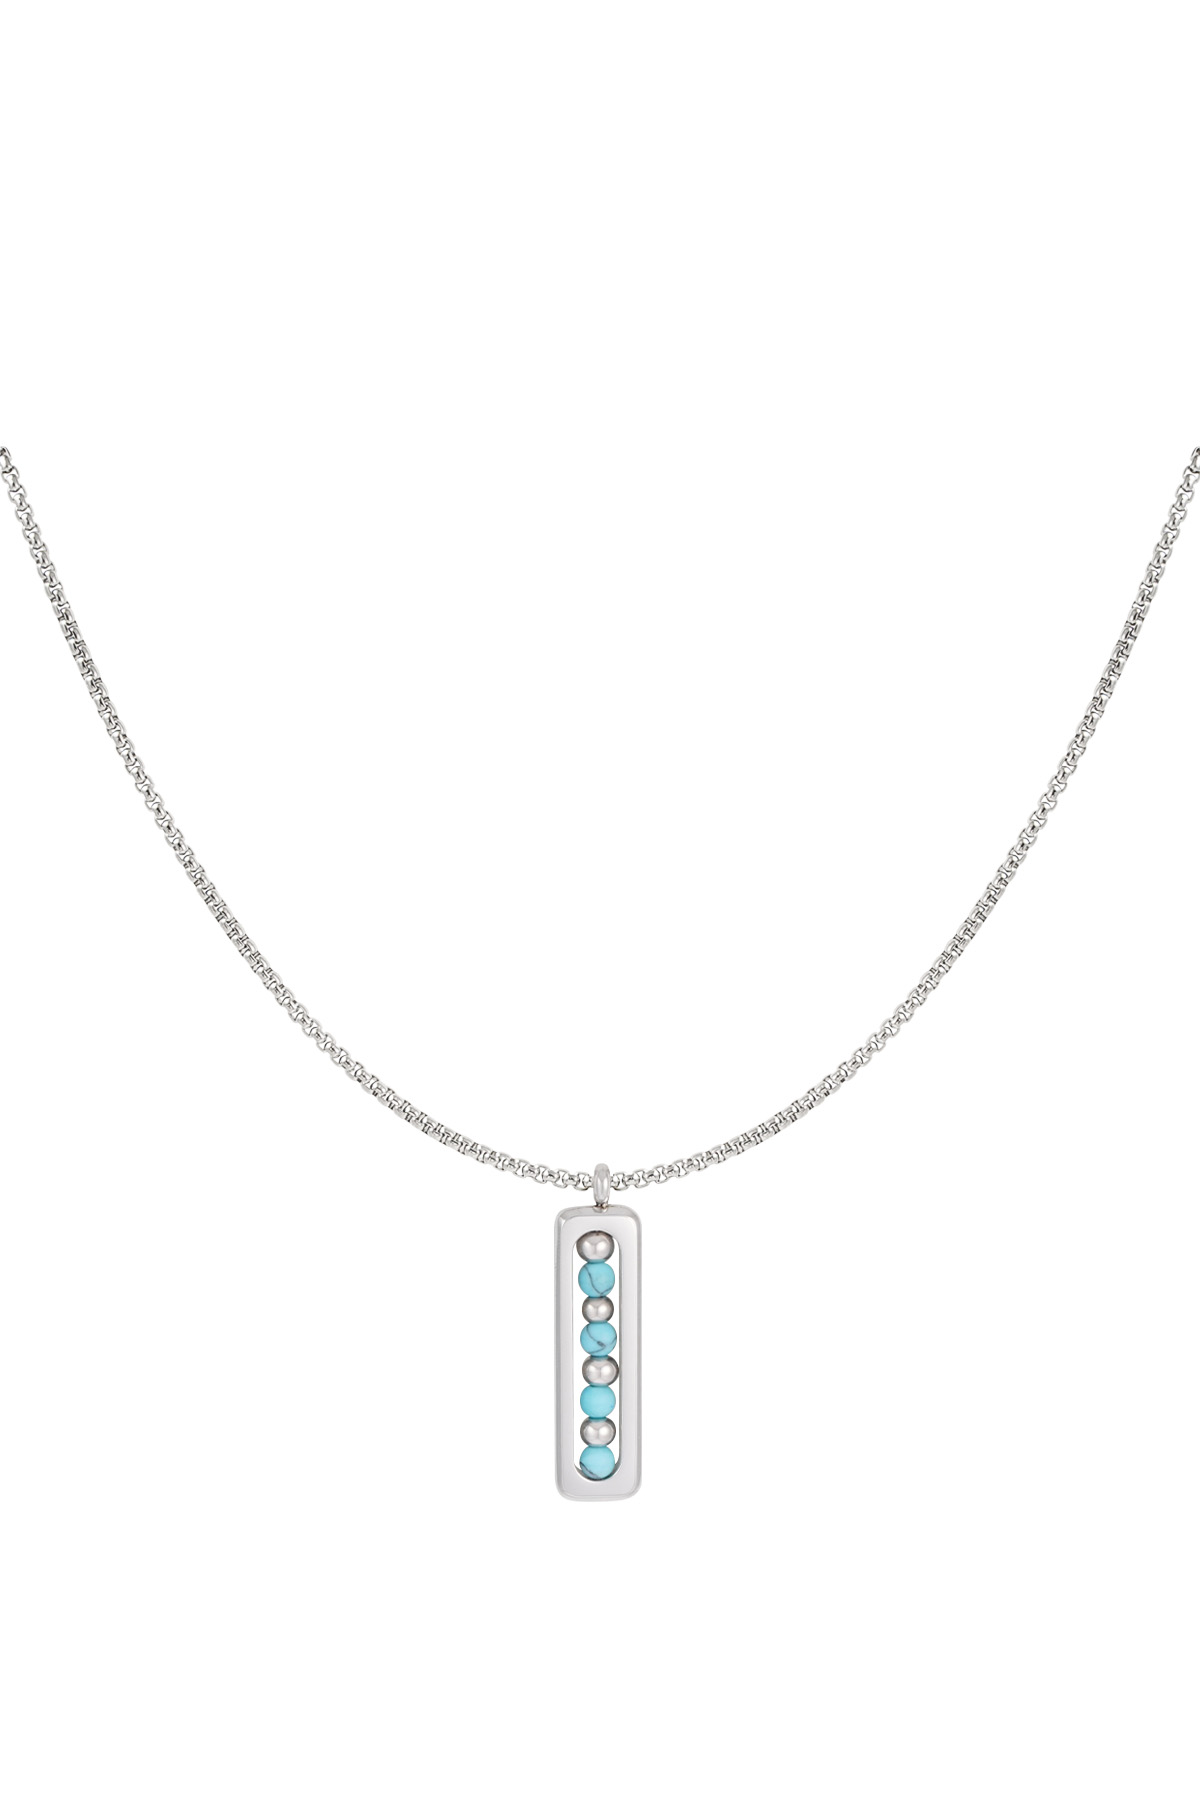 Men's necklace with ball charm - turquoise h5 